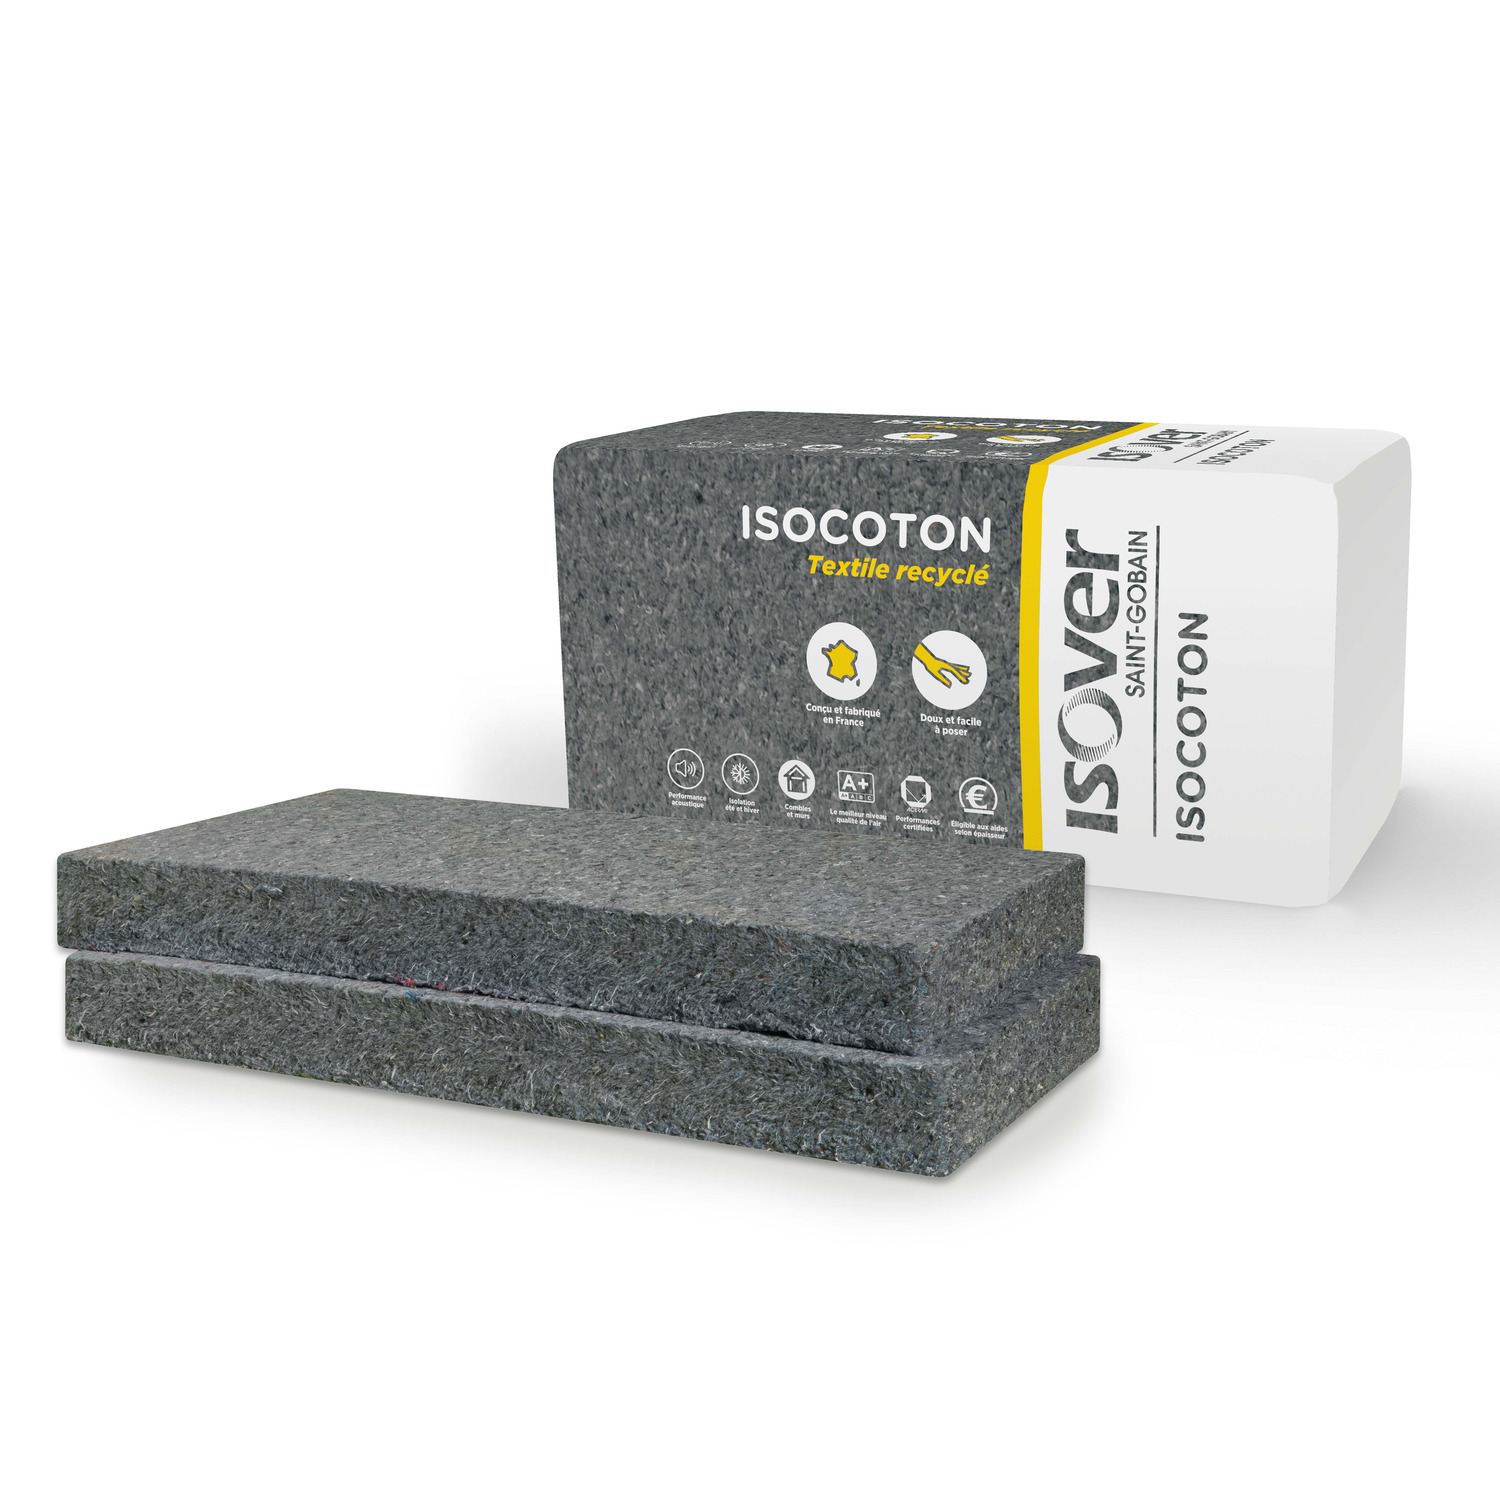 Isocoton Isover 1200x600 le m2